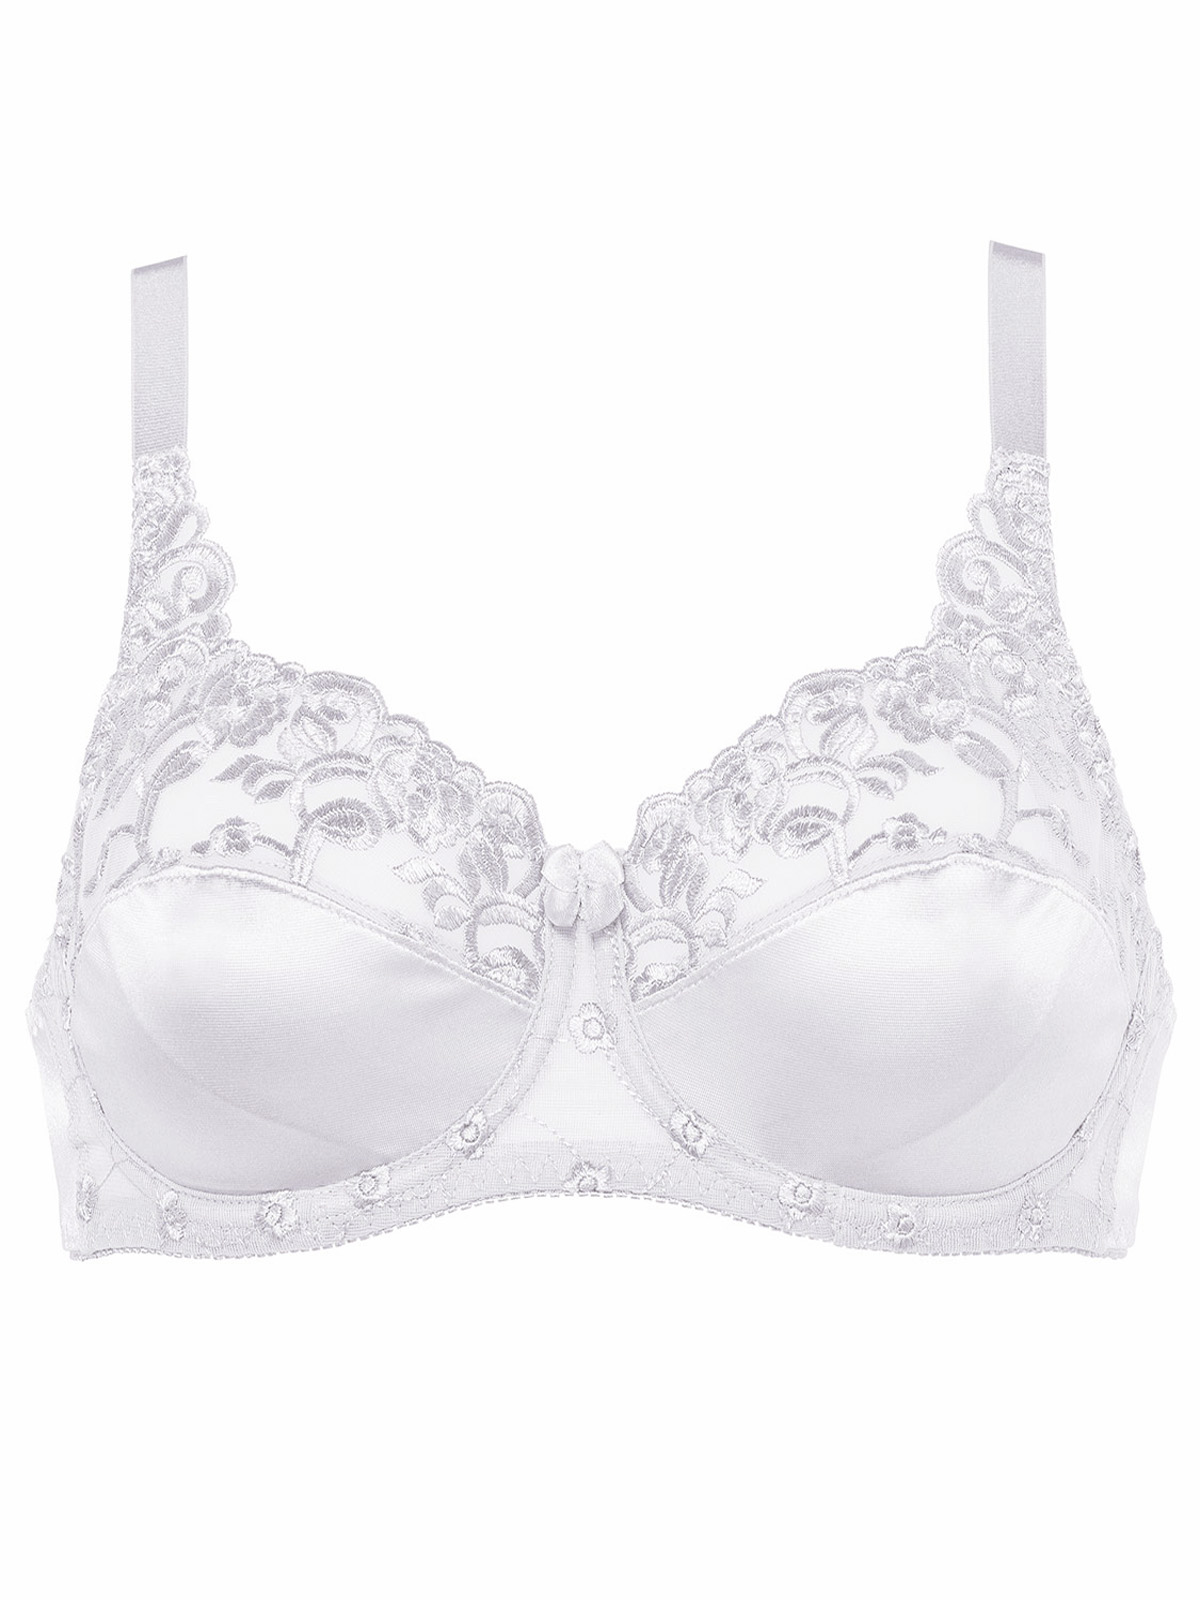 Naturana - - Naturana WHITE Floral Lace Underwired Satin Bra - Size 34 to 44  (B-C-D-DD)